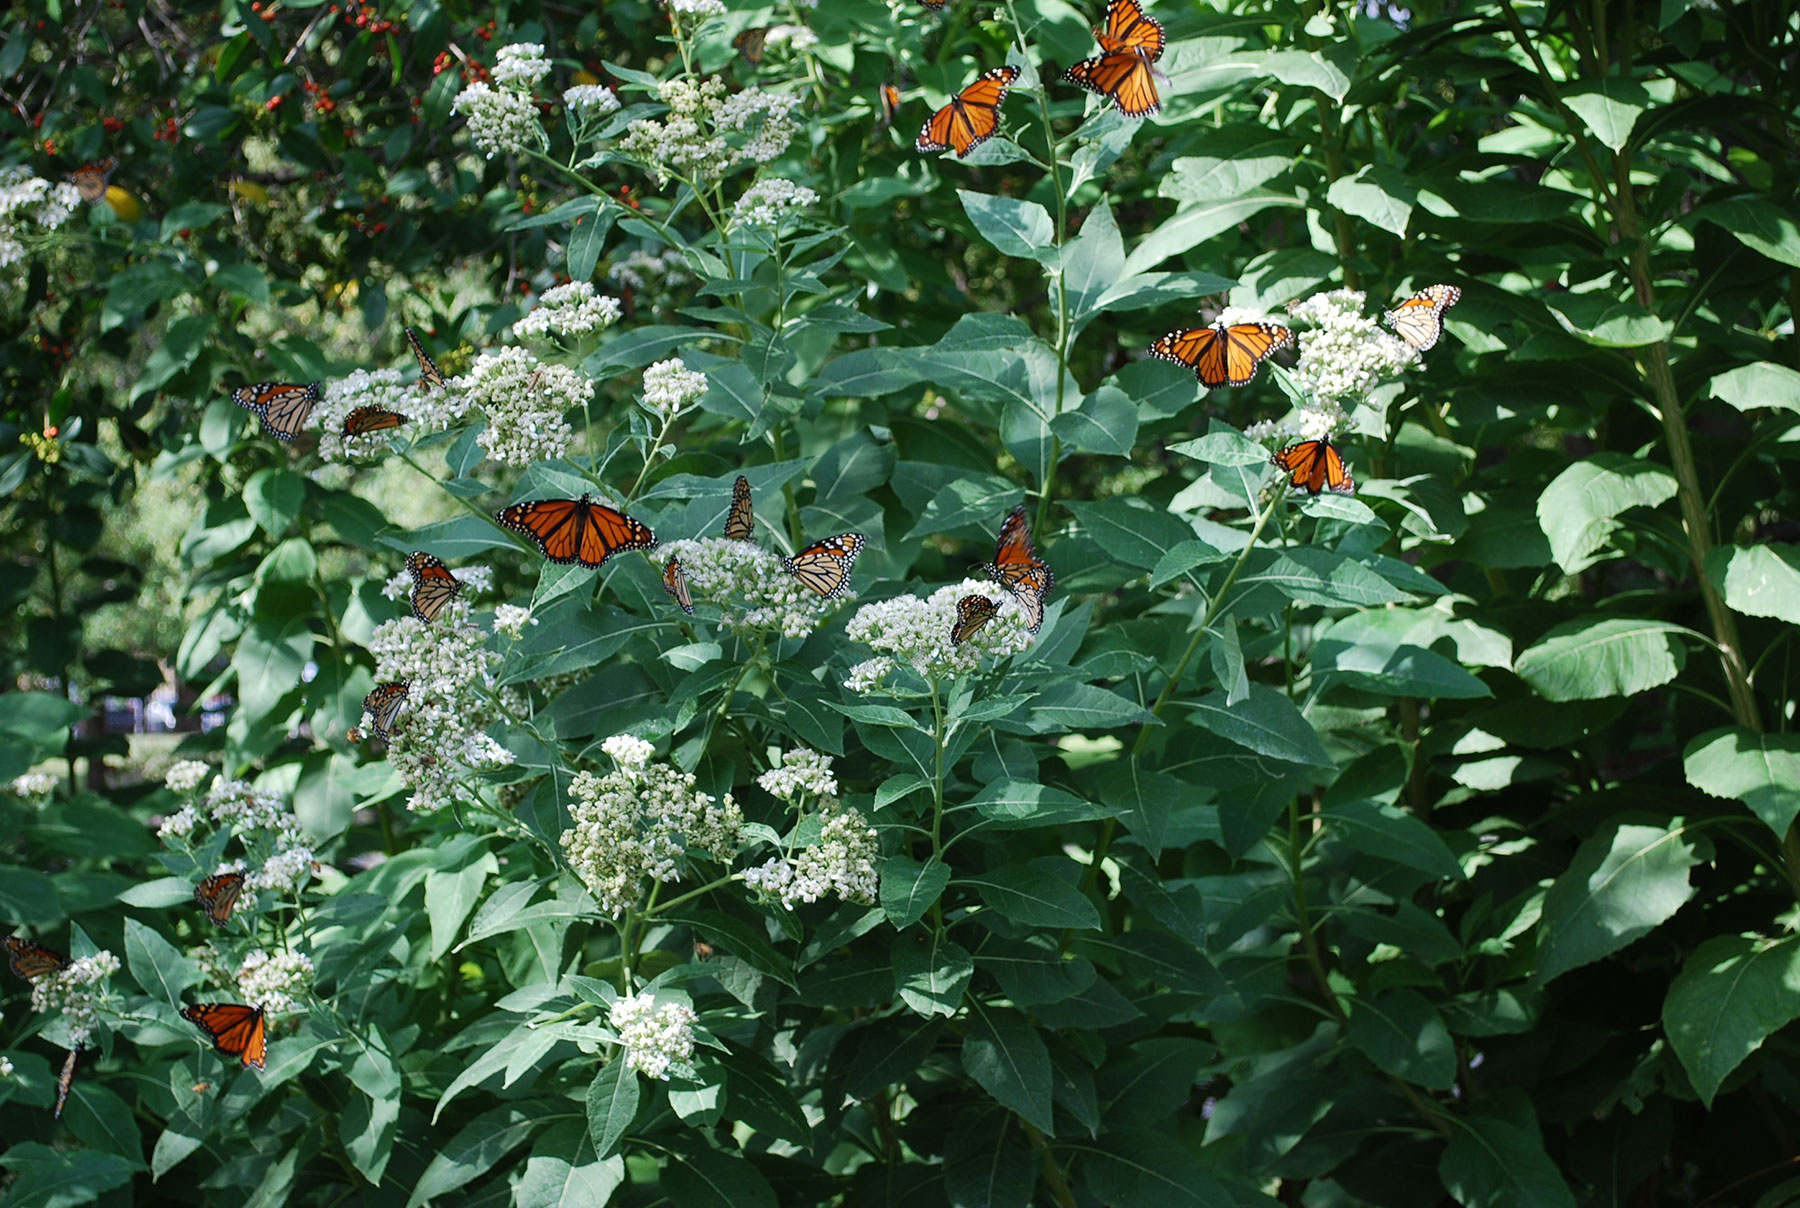 Migratory monarch butterflies gorging themselves on frostweed nectar on their way to Mexico; Texas State Fair (Dallas, TX); fall 2014